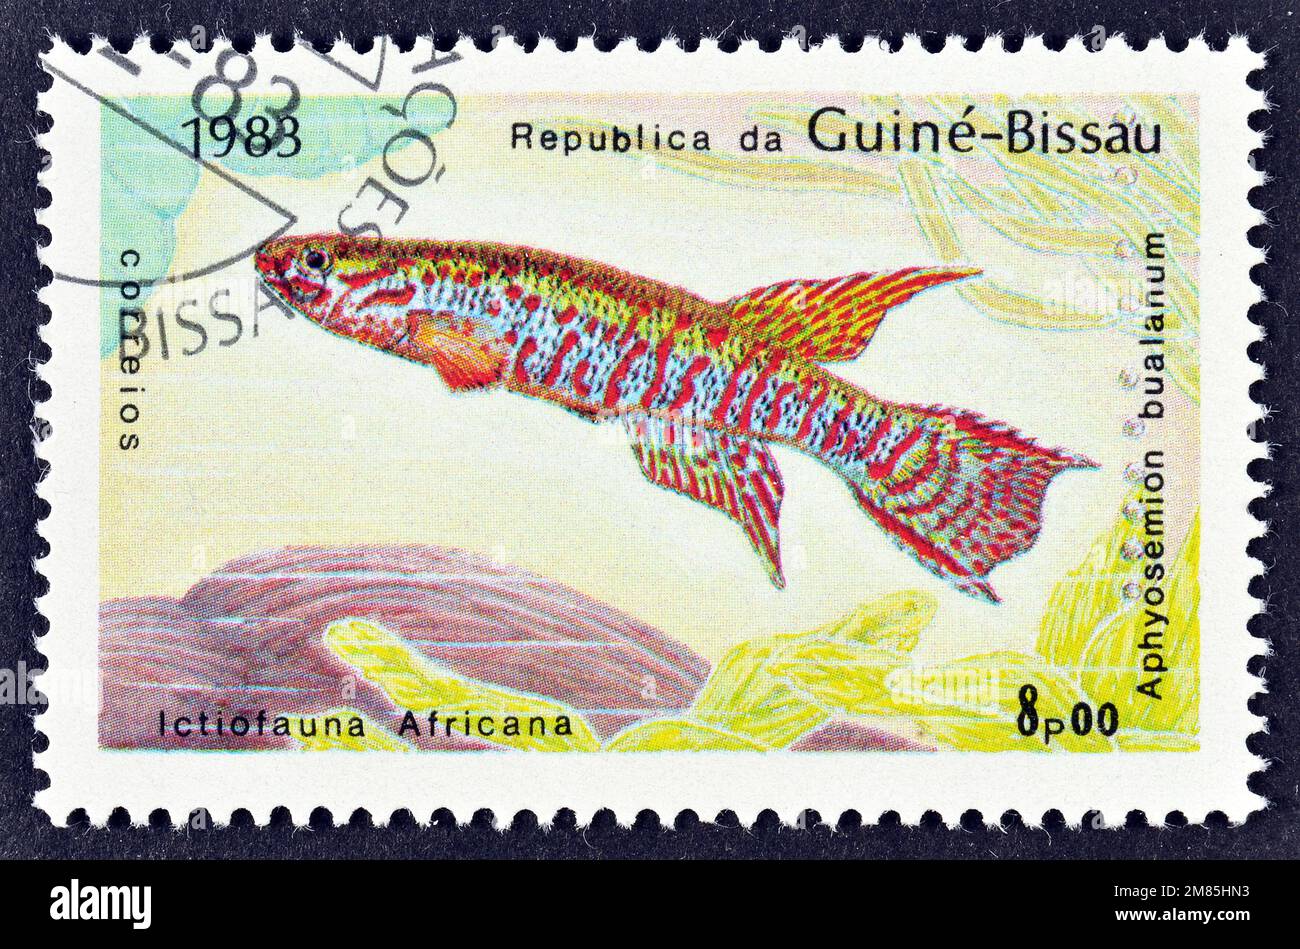 Cancelled postage stamp printed by Guinea Bissau, that shows African Swamp Killifish (Aphyosemion bualanum), circa 1983. Stock Photo